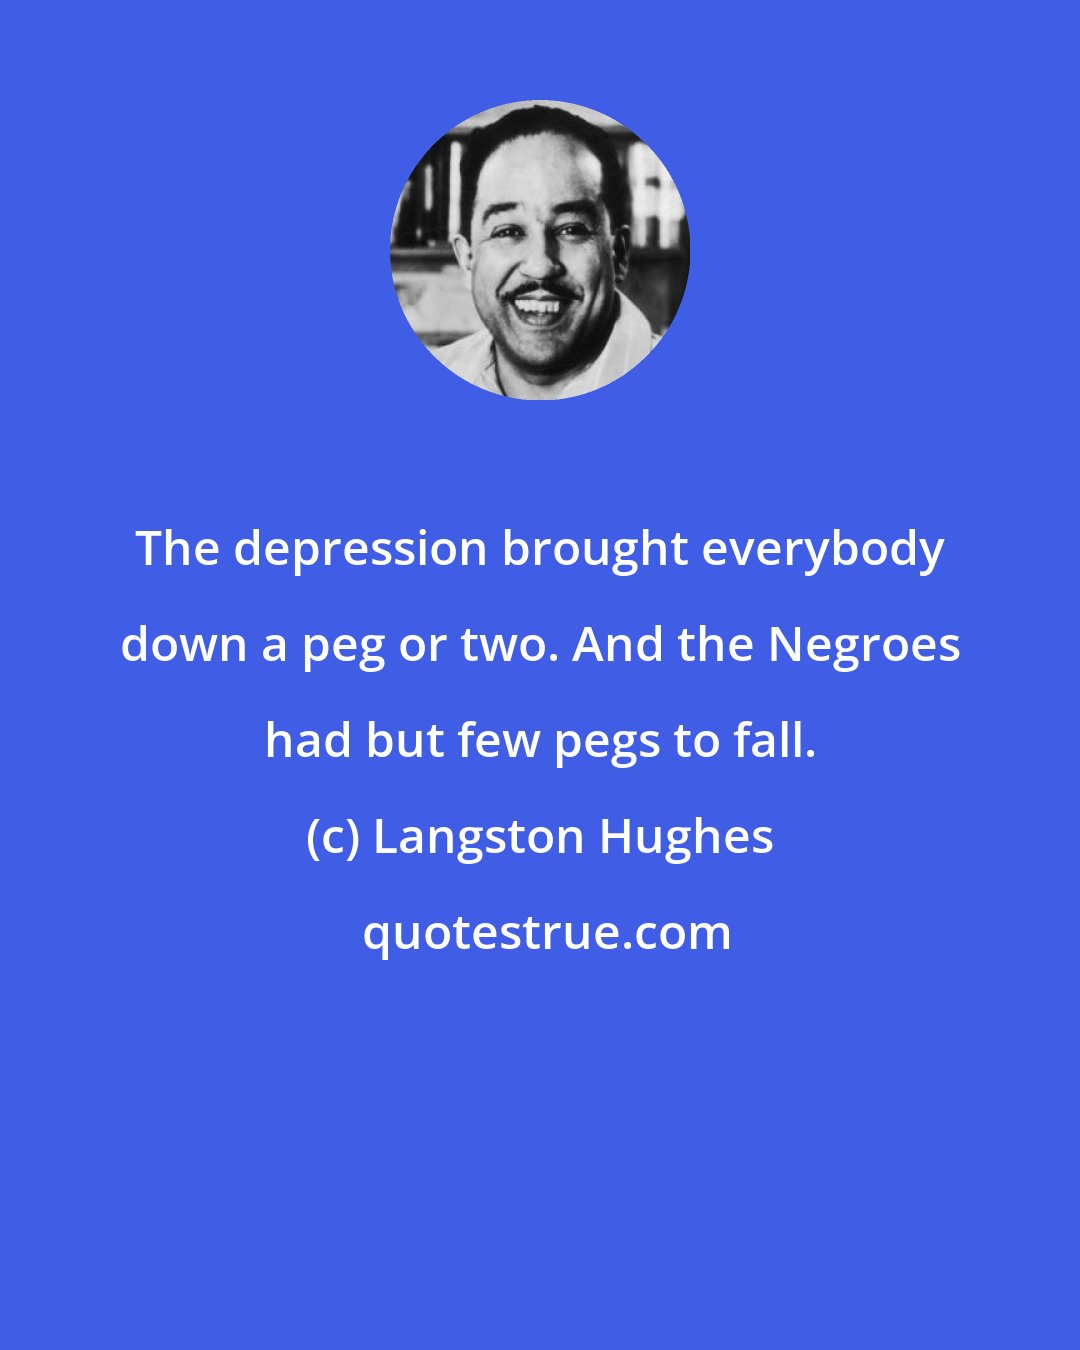 Langston Hughes: The depression brought everybody down a peg or two. And the Negroes had but few pegs to fall.